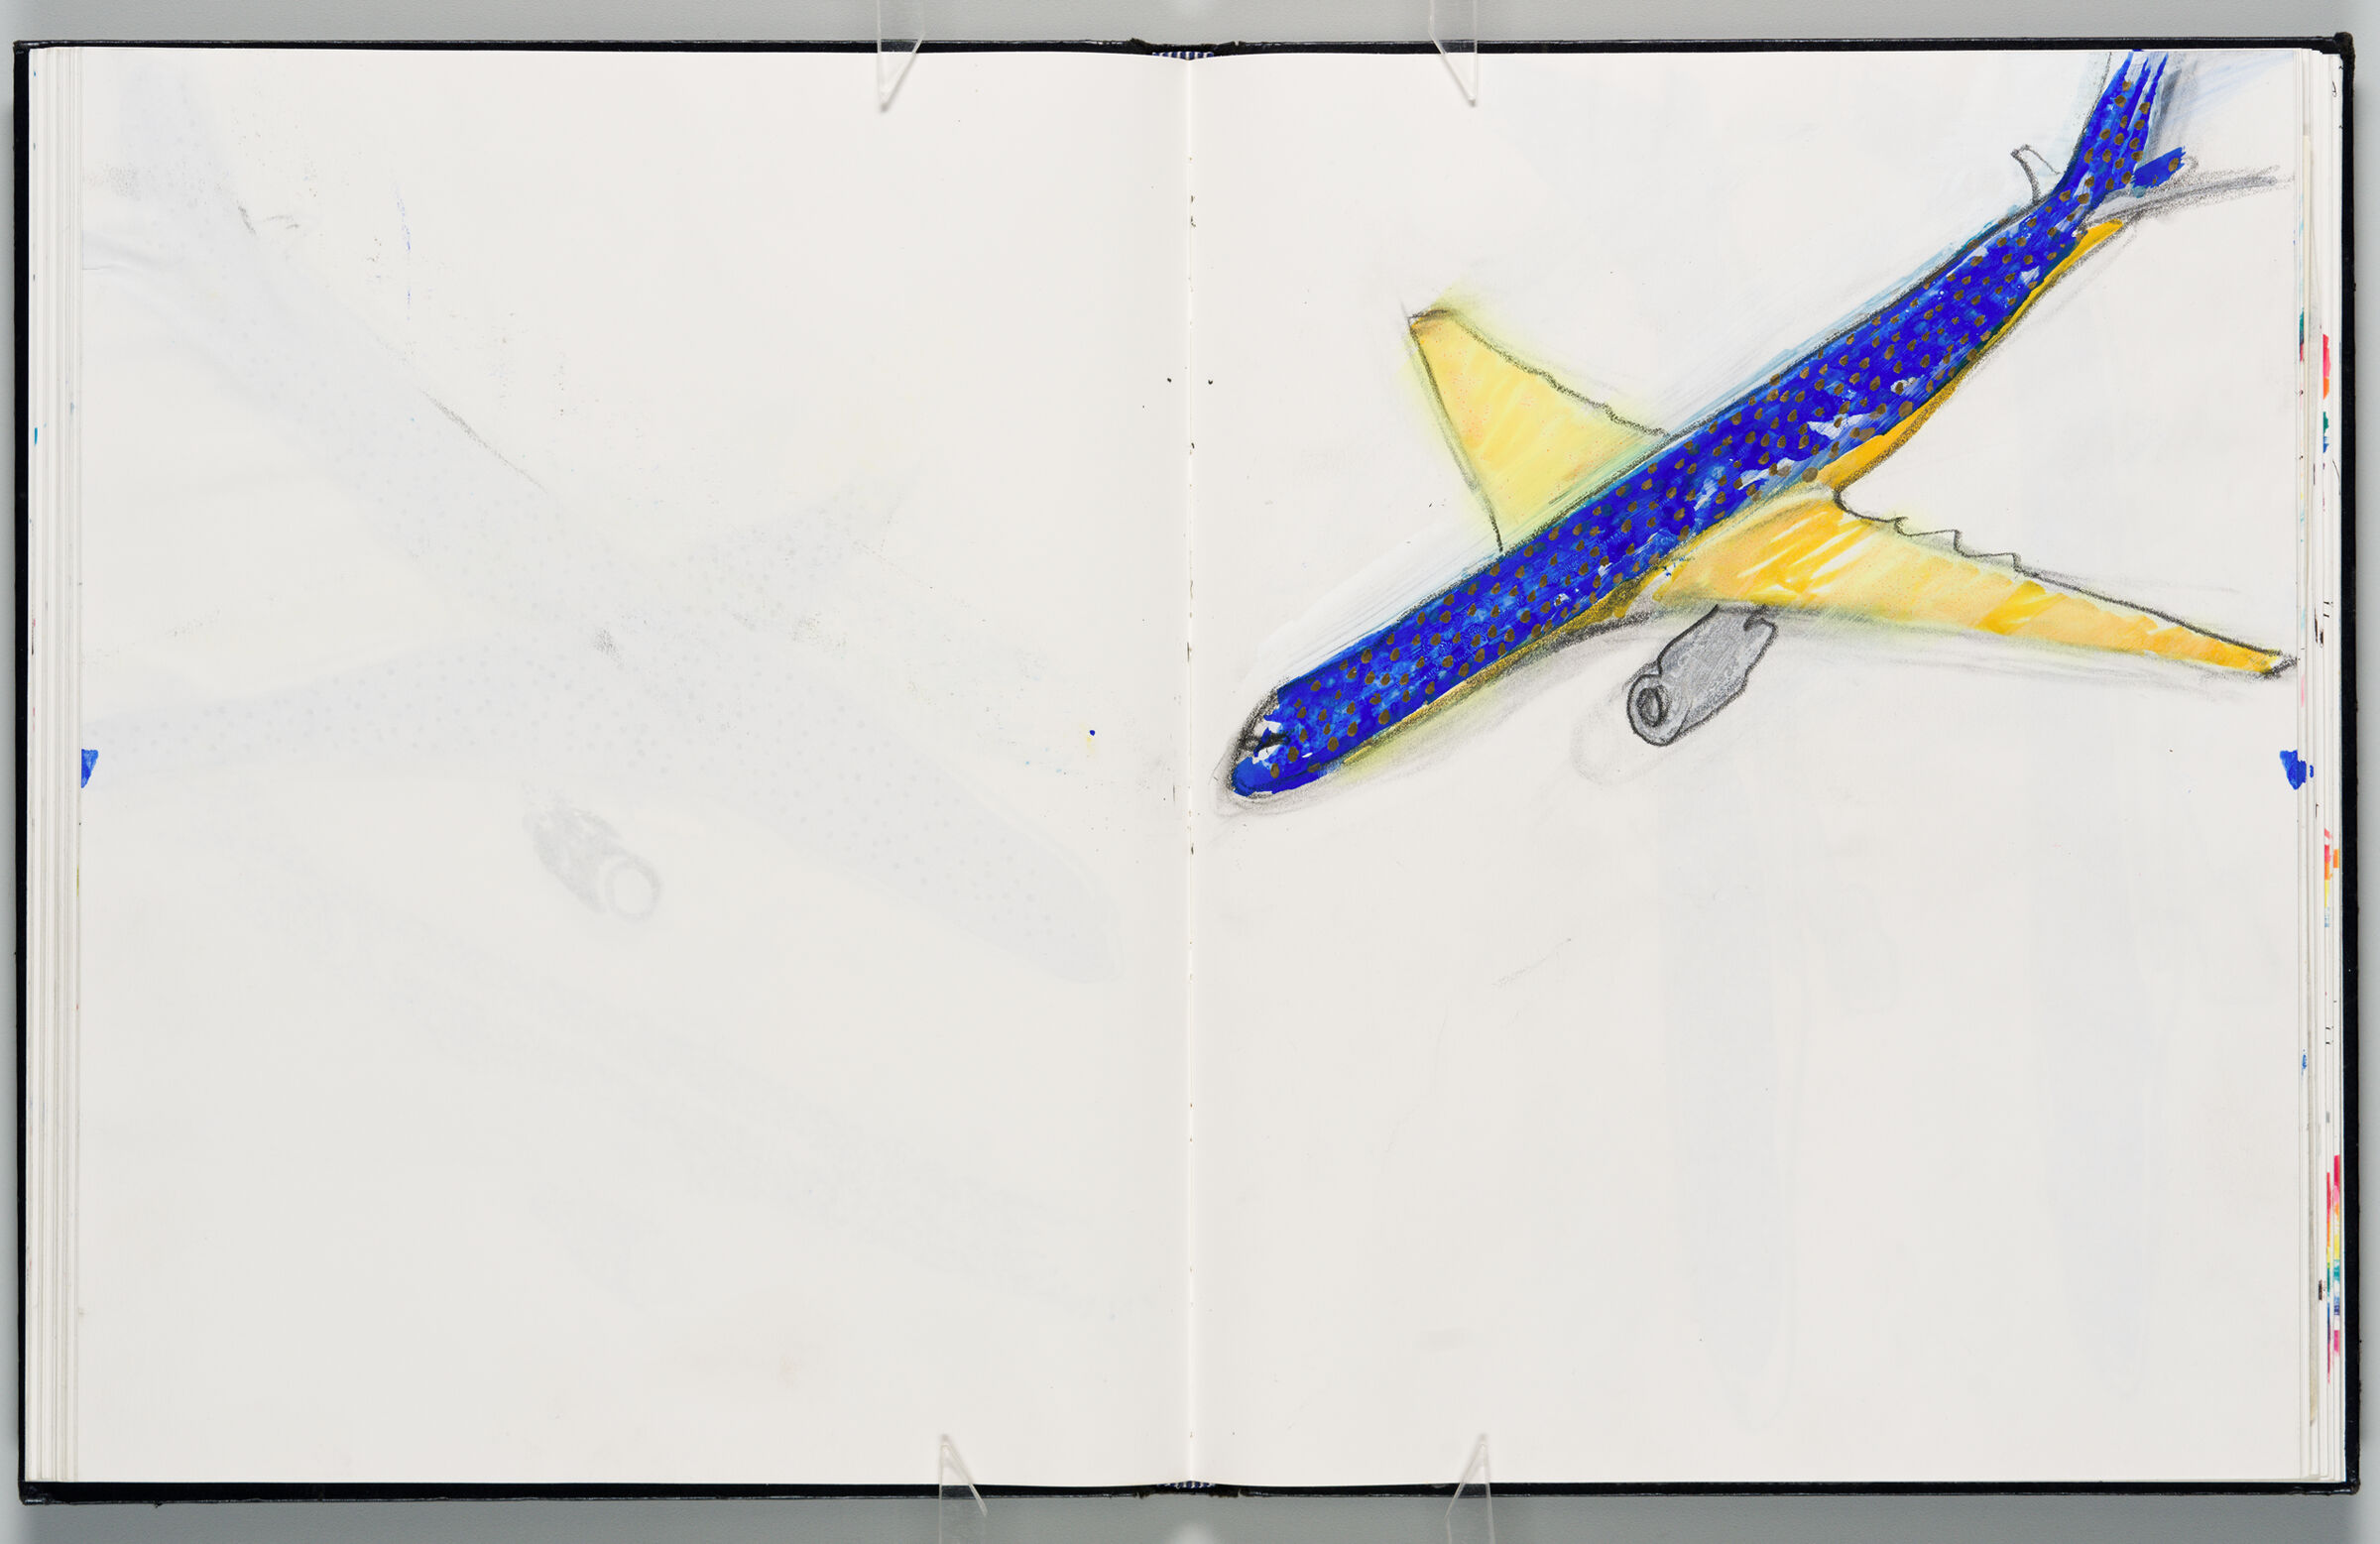 Untitled (Blank With Color Transfer, Left Page); Untitled (Starplane Design For Condor, Right Page)